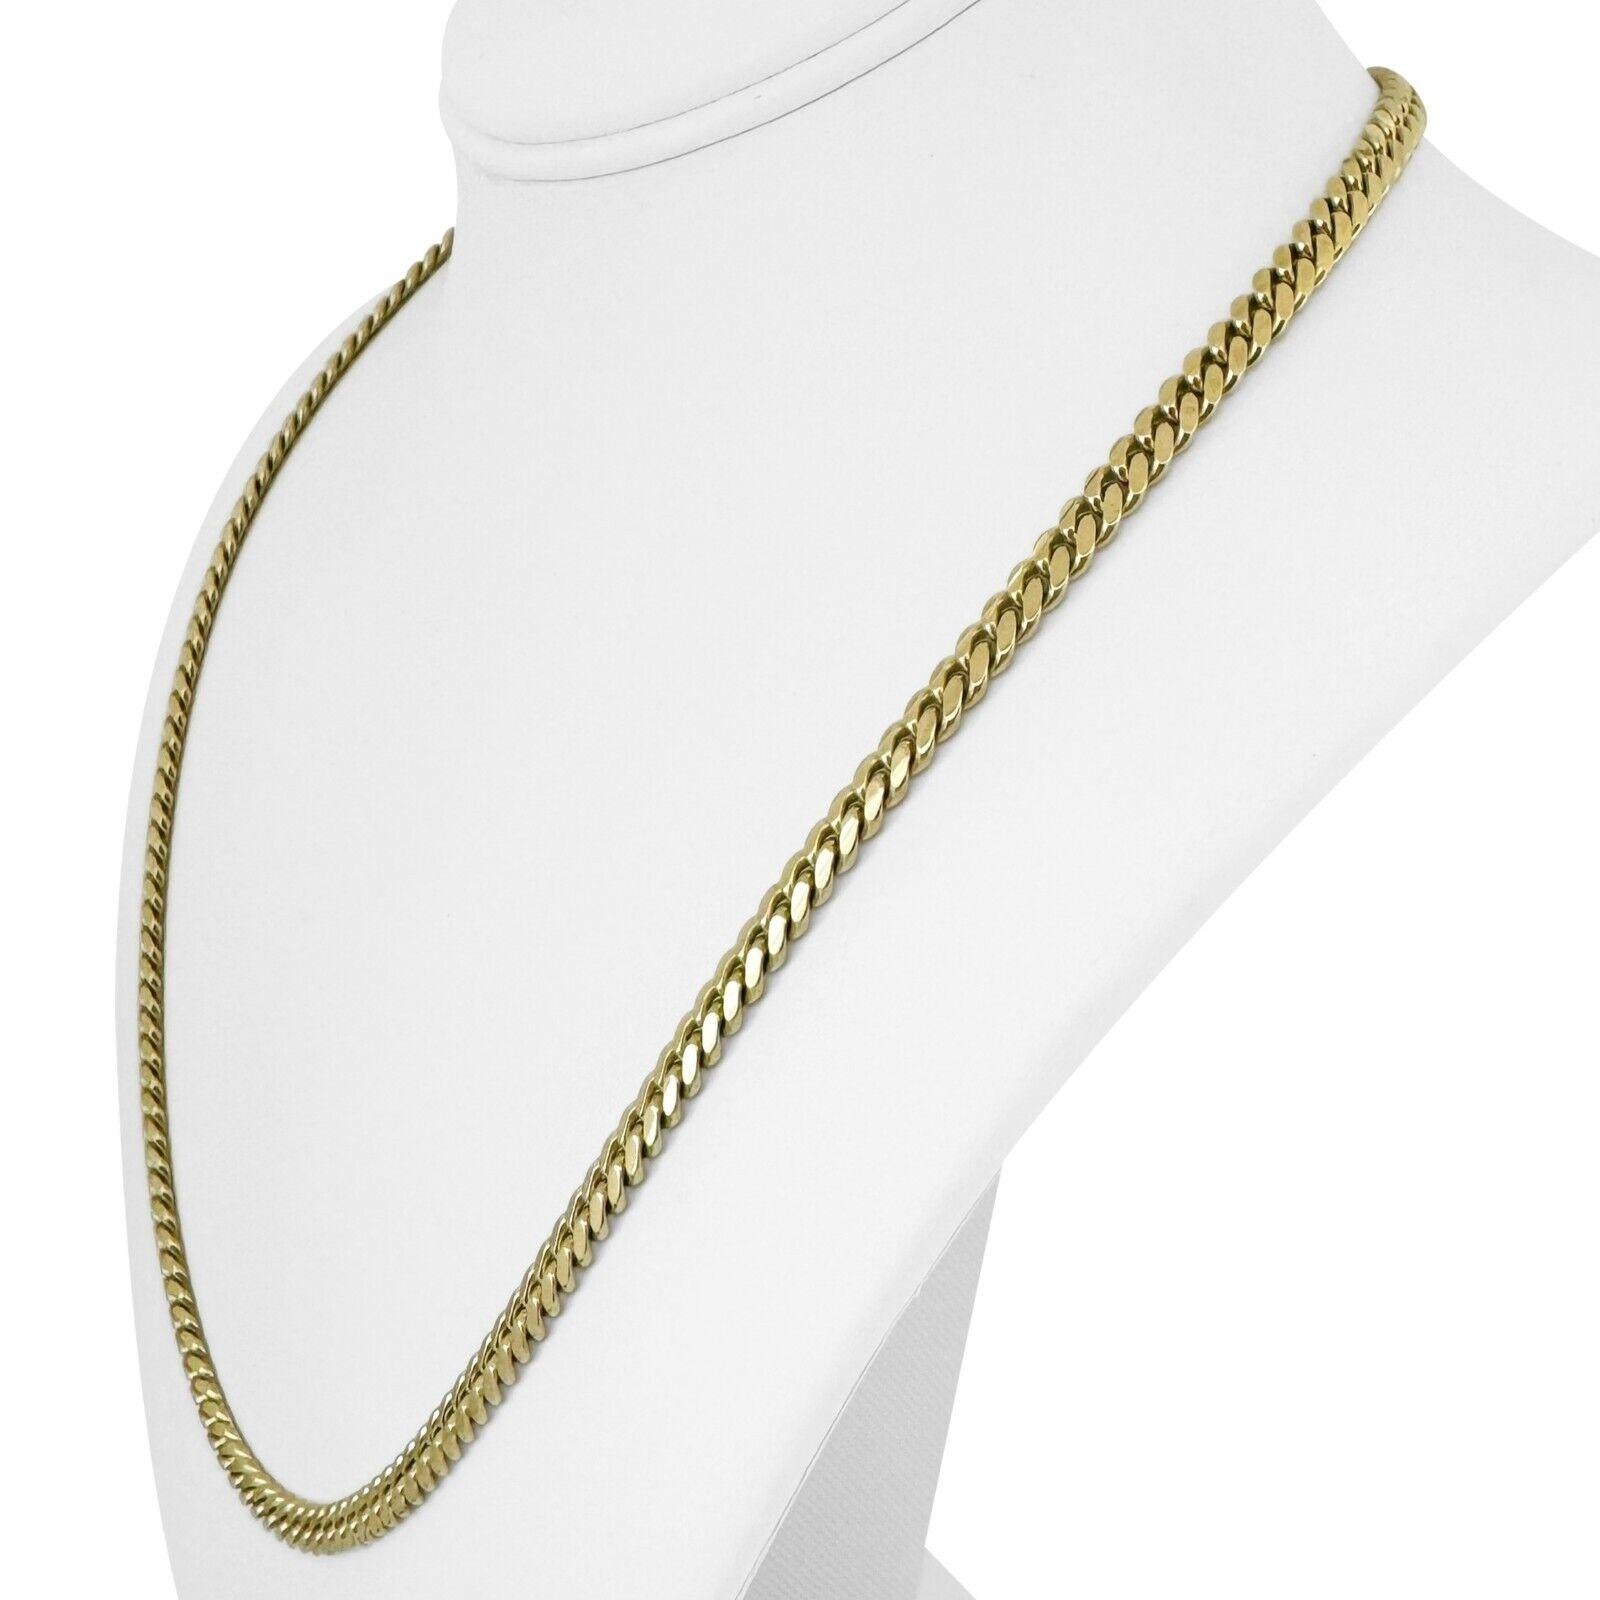 10k Yellow Gold 51.4g Solid Heavy 5mm Men's Cuban Link Chain Necklace 28